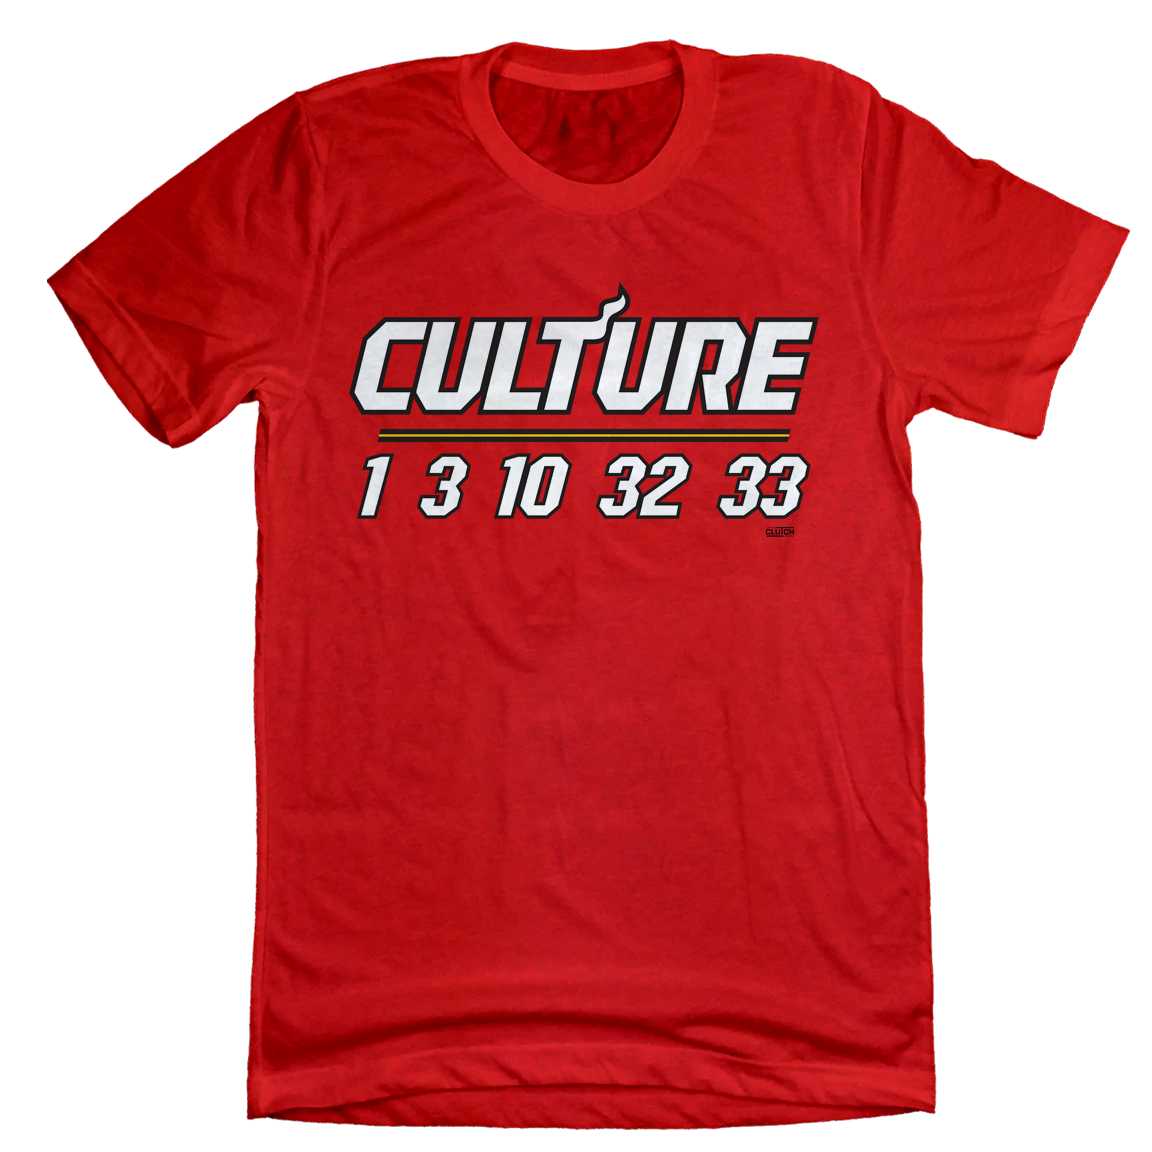 Miami Basketball Culture tee red